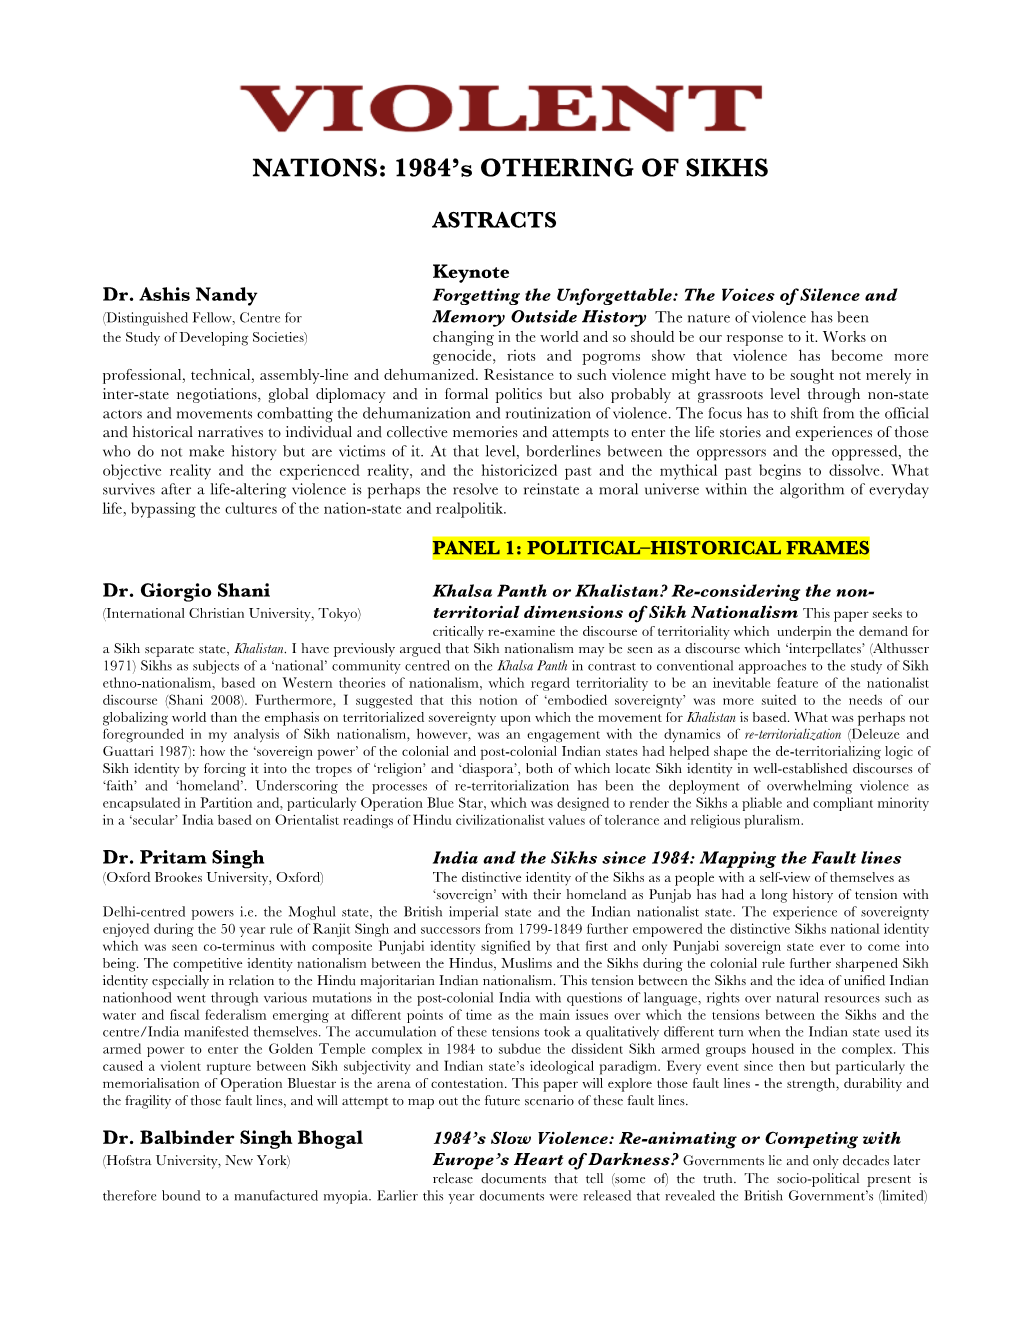 Sikh-Violent-Nations-Abstracts.Pdf